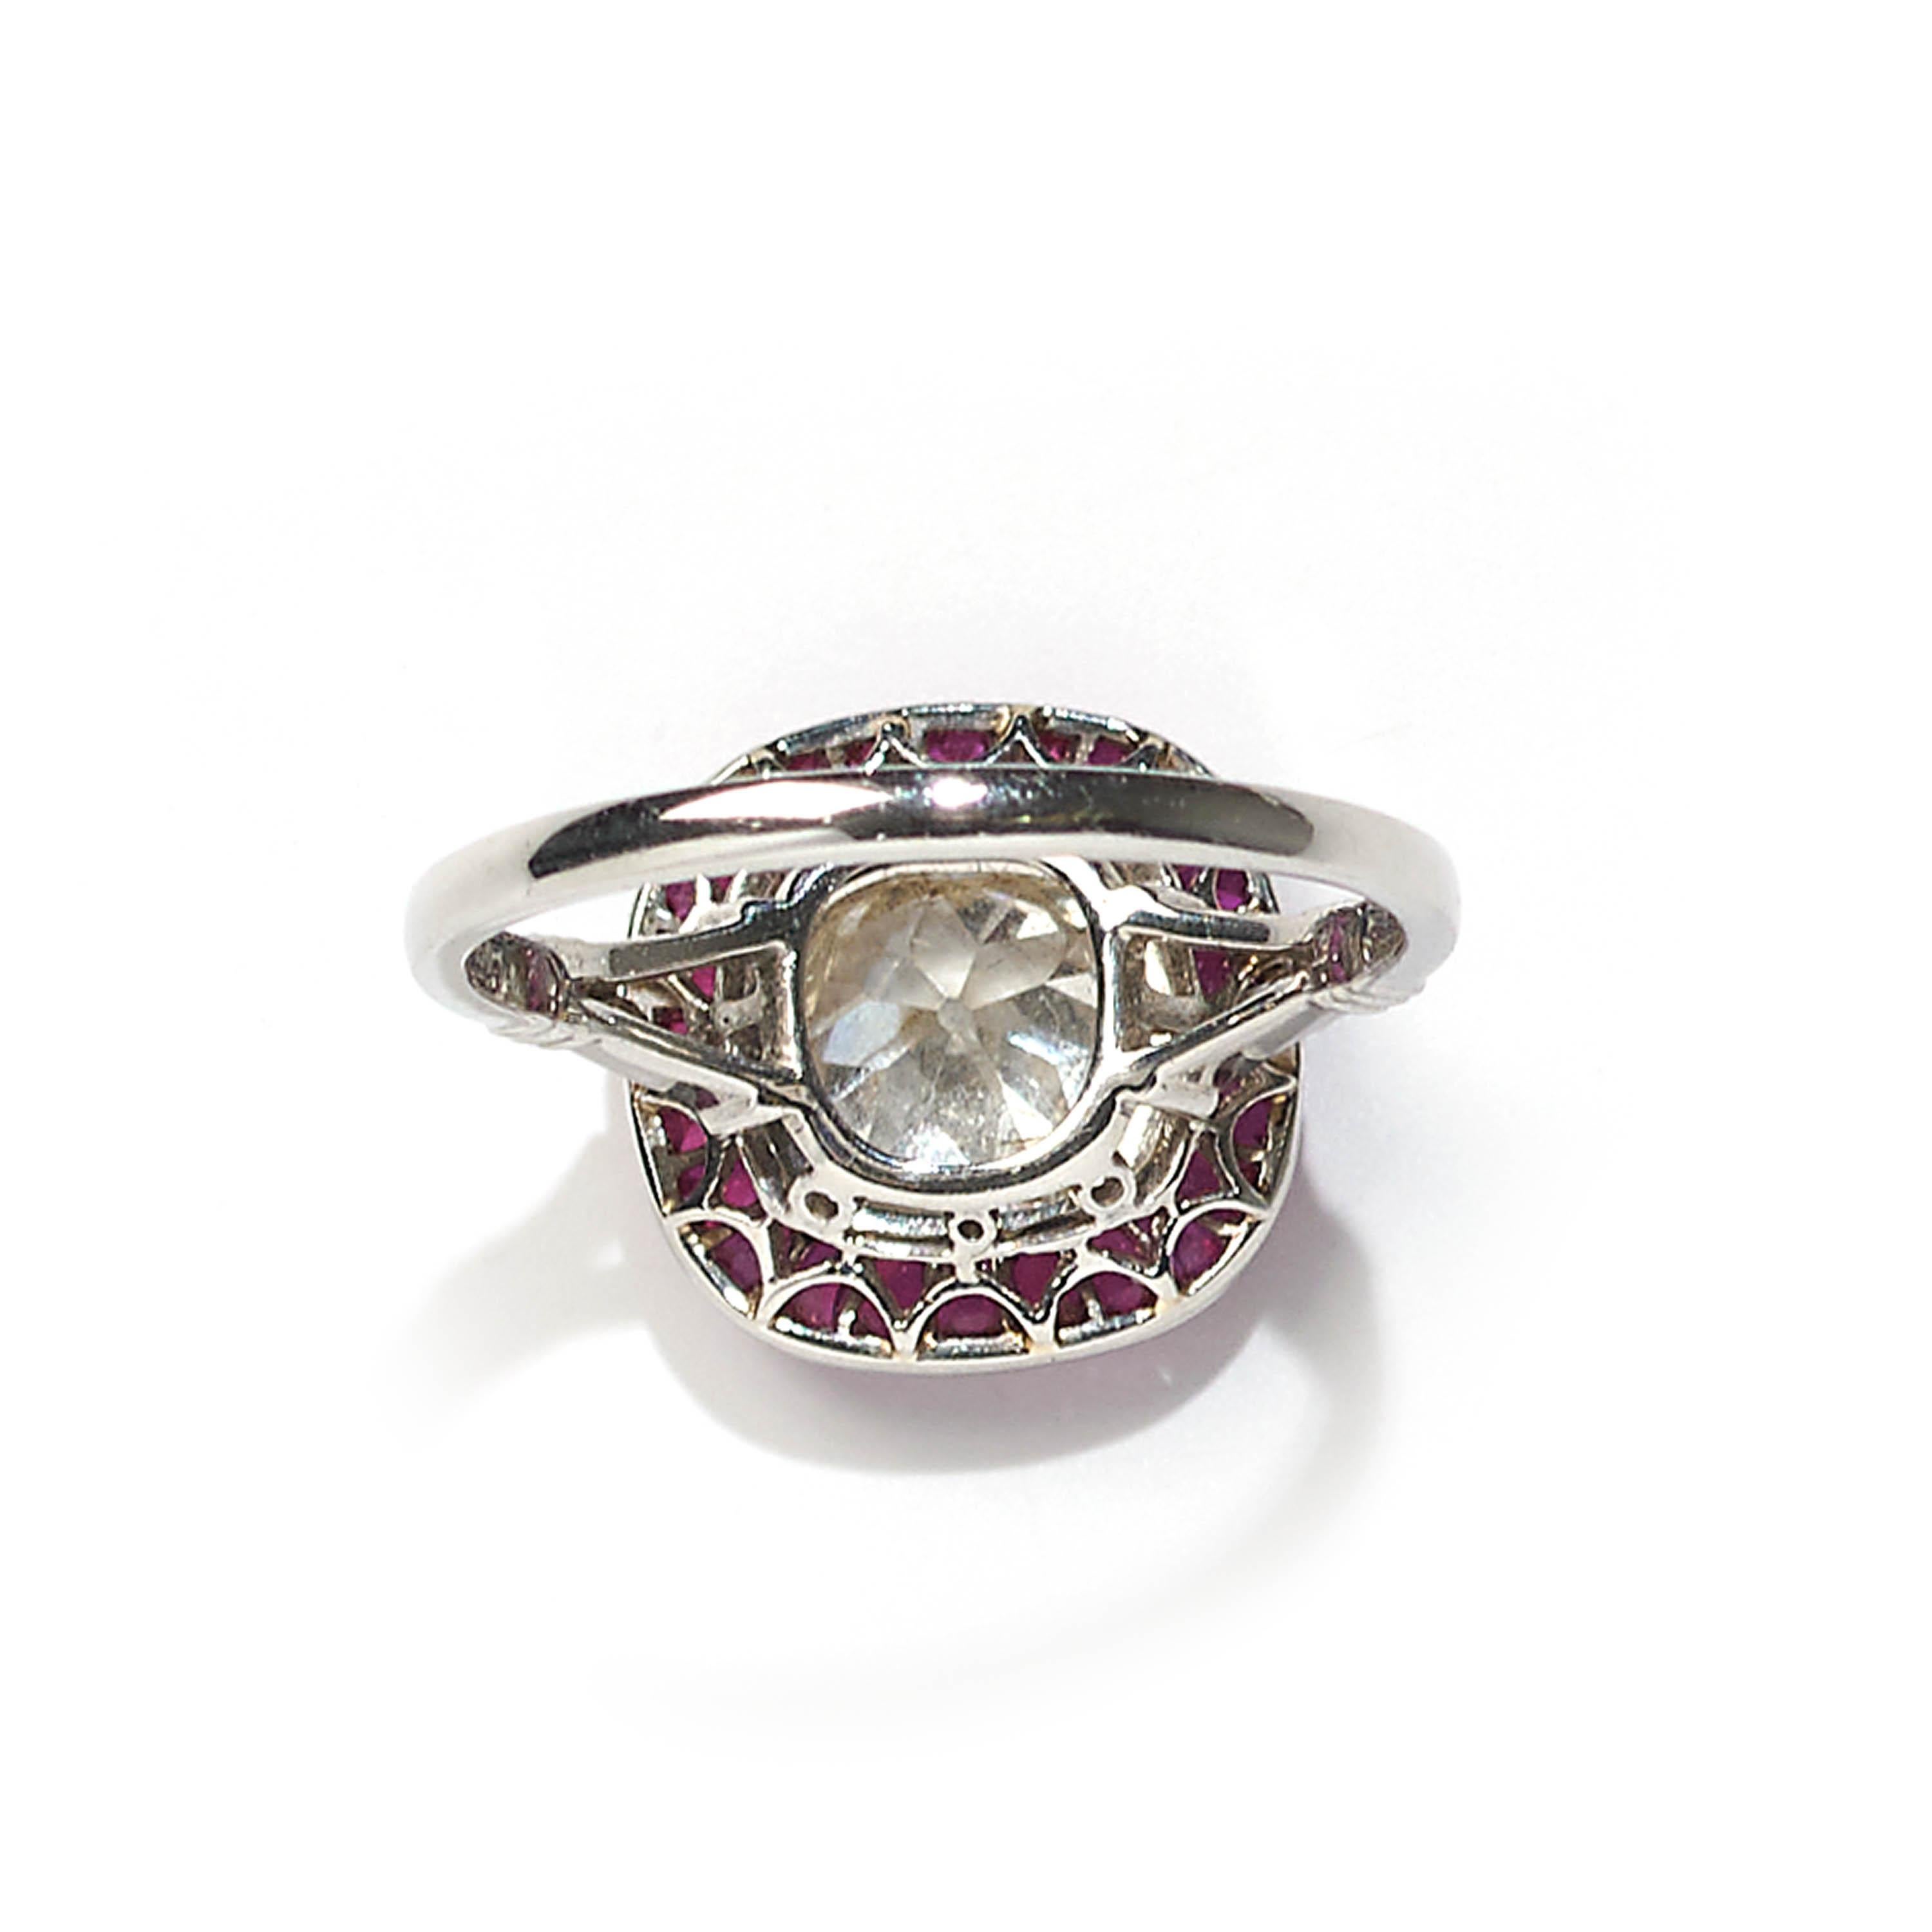 A modern cushion-shaped cluster ring, the central cushion-cut diamond weighing 1.32 carats, surrounded by a border of rubies weighing a total of 2.30 carats, all mounted in platinum.